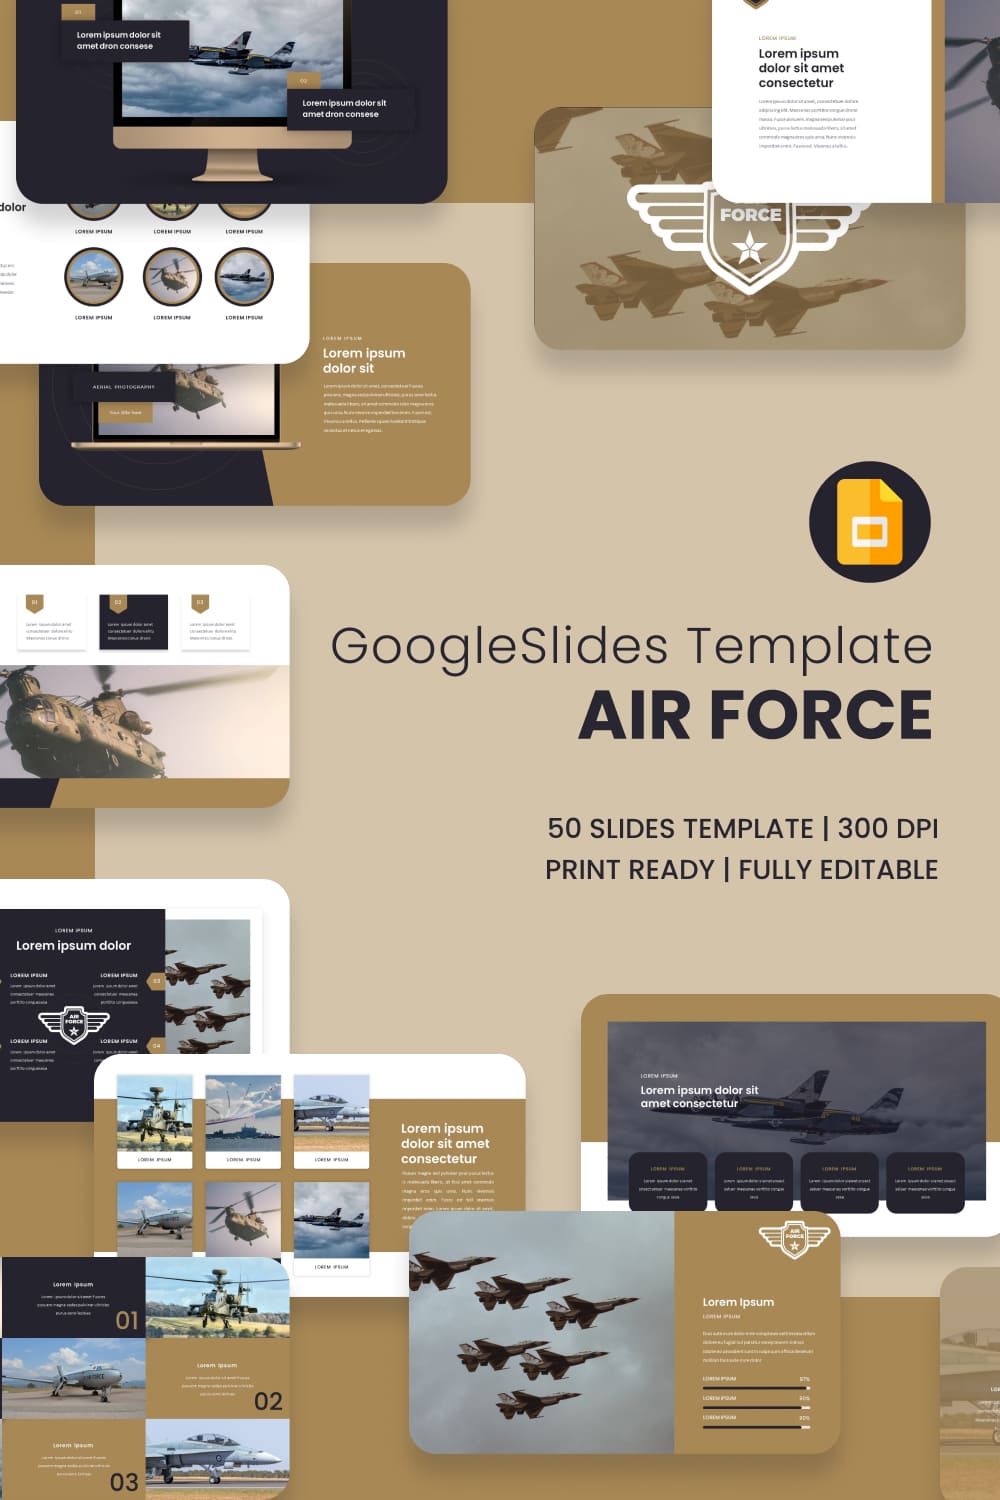 AirForce Military Template in Google Slides.